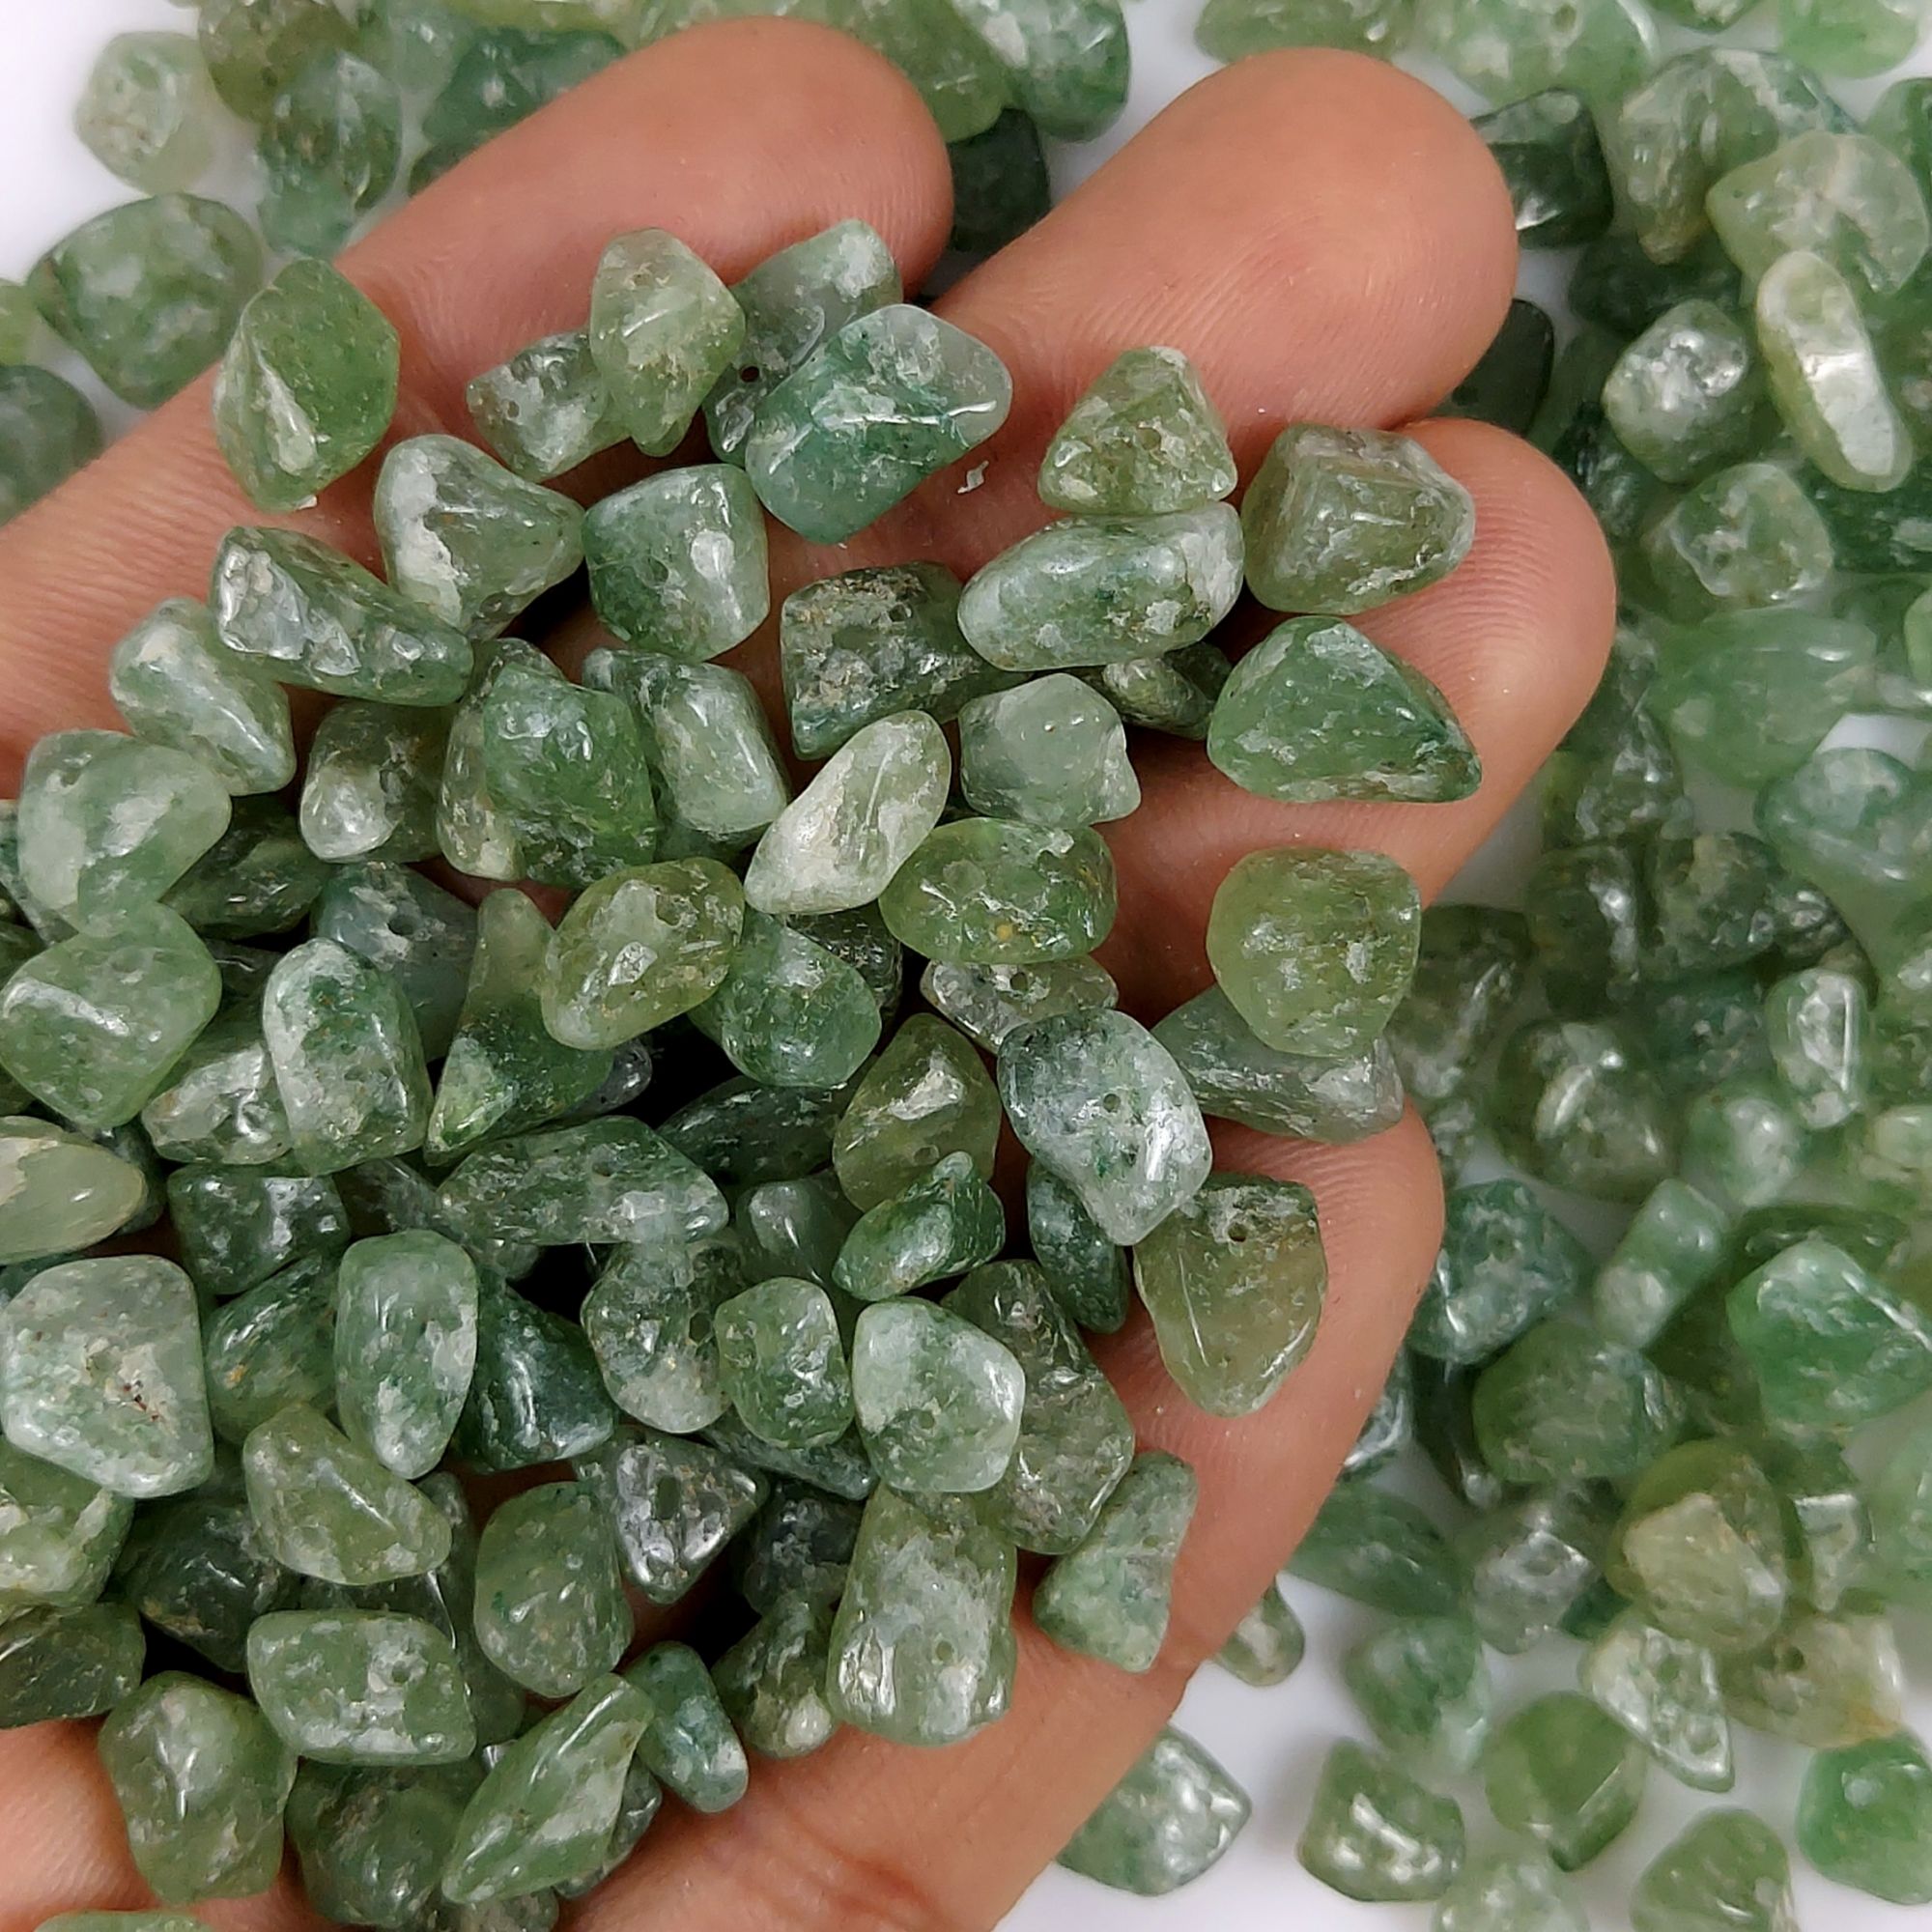 220Pcs 445Cts  Natural Green Aventurine Gemstone Chips Uncut Beads for Jewelry Making Center Drill Loose Gemstones Nuggets Chips Smooth Beads Bracelet Gift for Her 10x6 6x5 mm#G-416